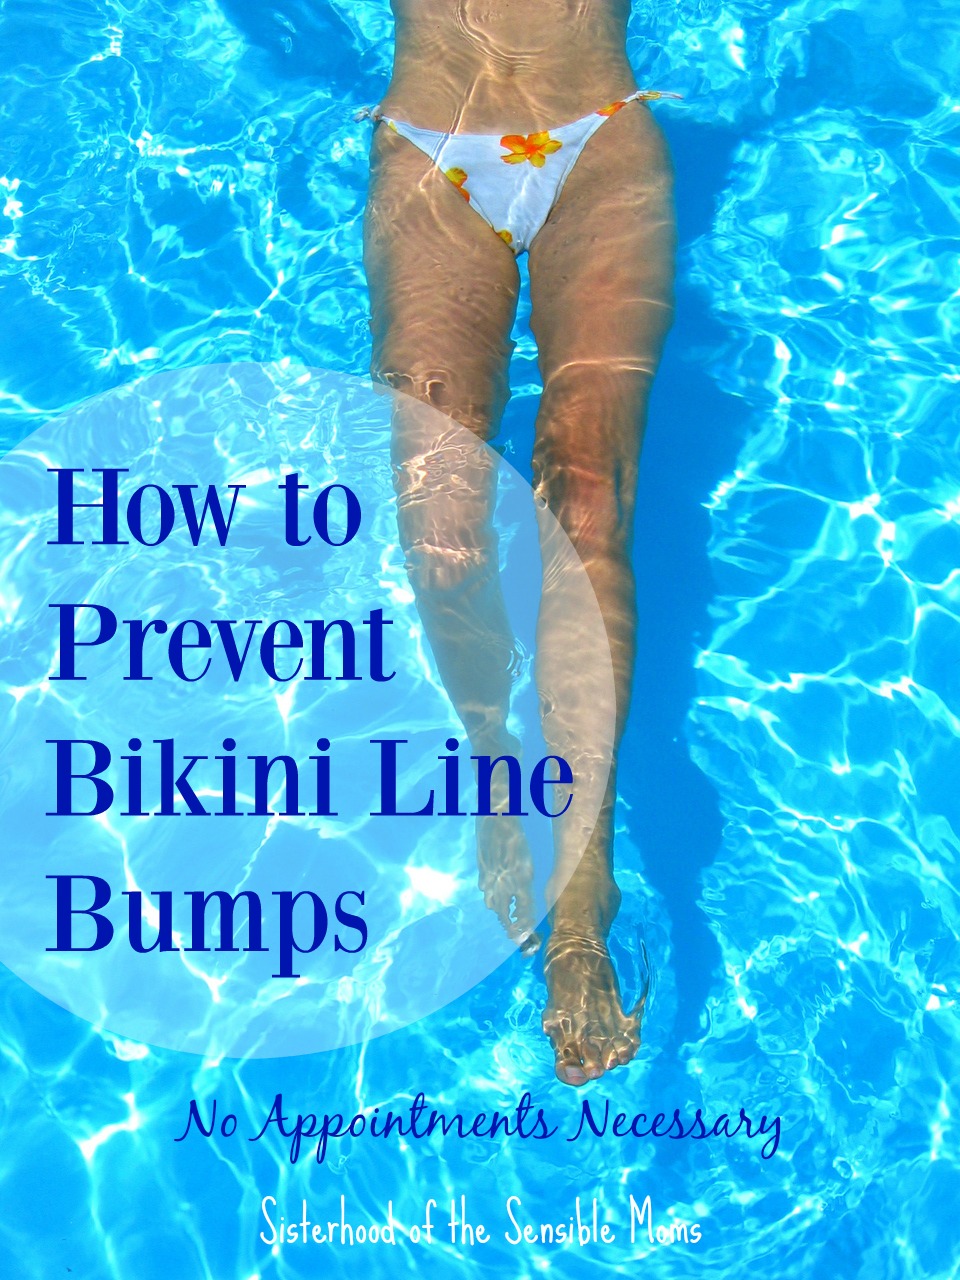 Get summer ready! How to Prevent Bikini Line Bumps. Have you tried everything to prevent bikini line bumps? Think again. You may not have tried this cheap, painless, and easy solution. | Sisterhood of the Sensible Moms